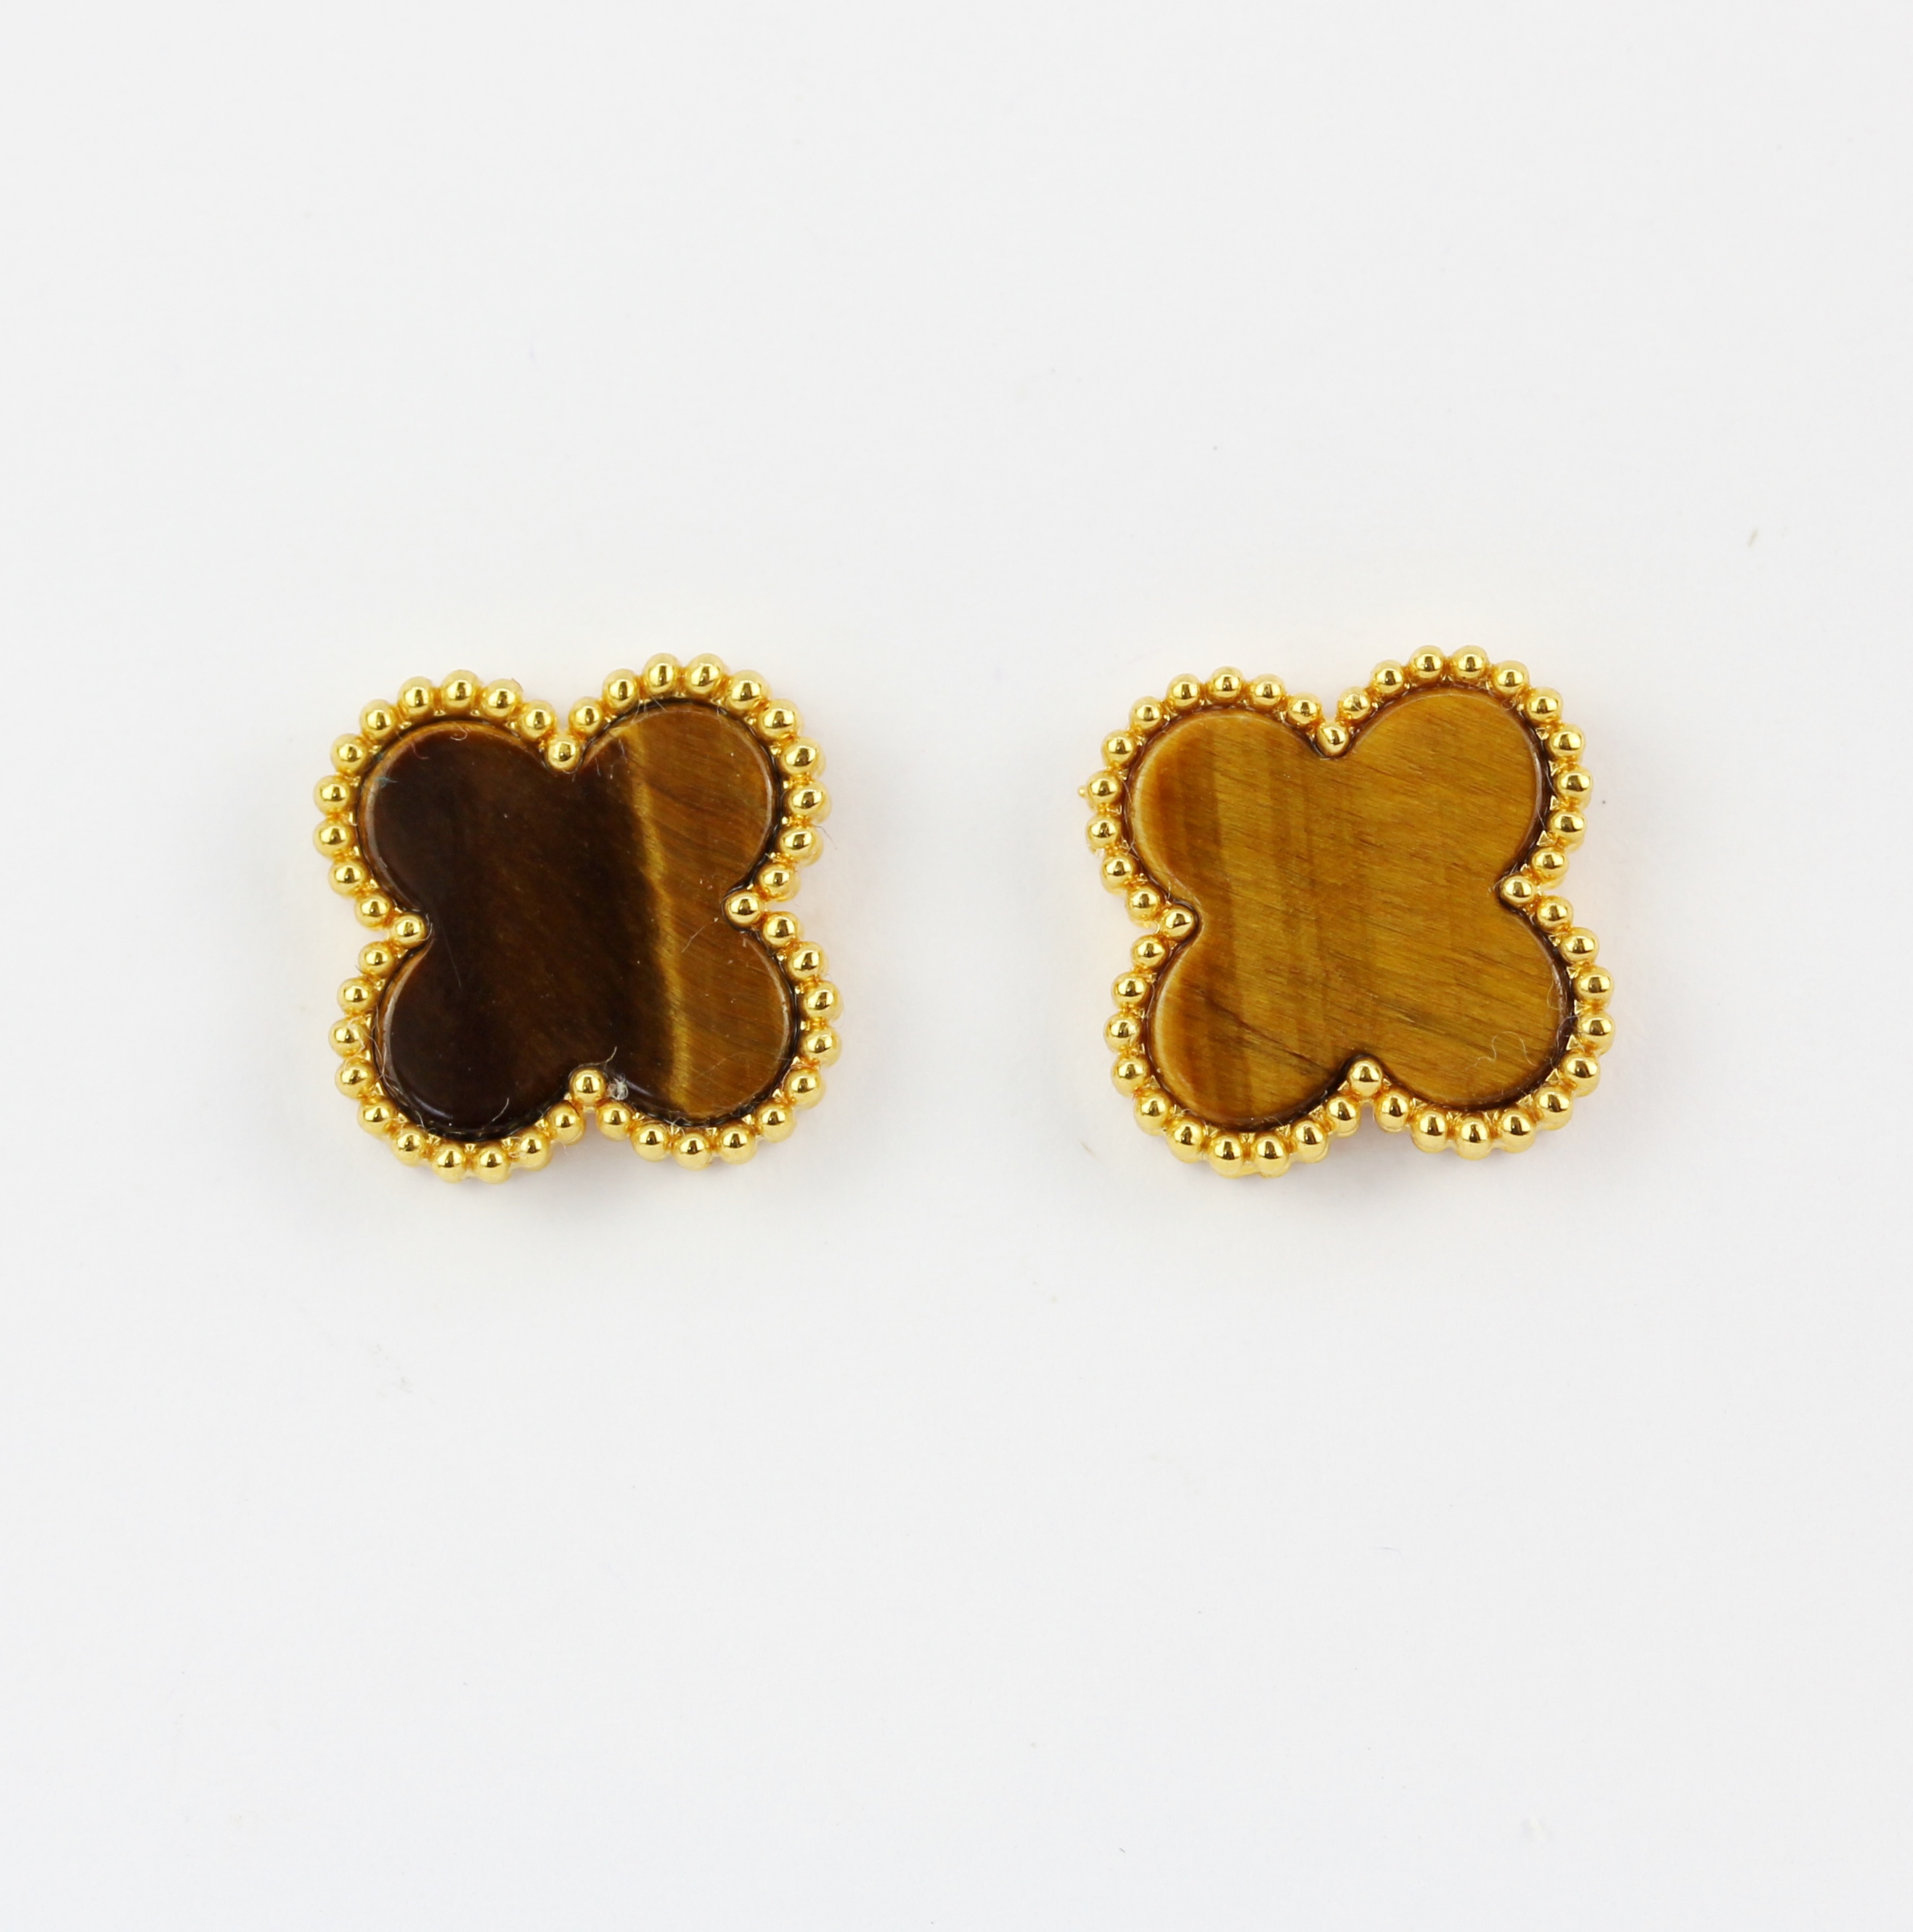 A pair of 18ct yellow gold clover shaped stud earrings set with tiger's eye, 1.5cm.